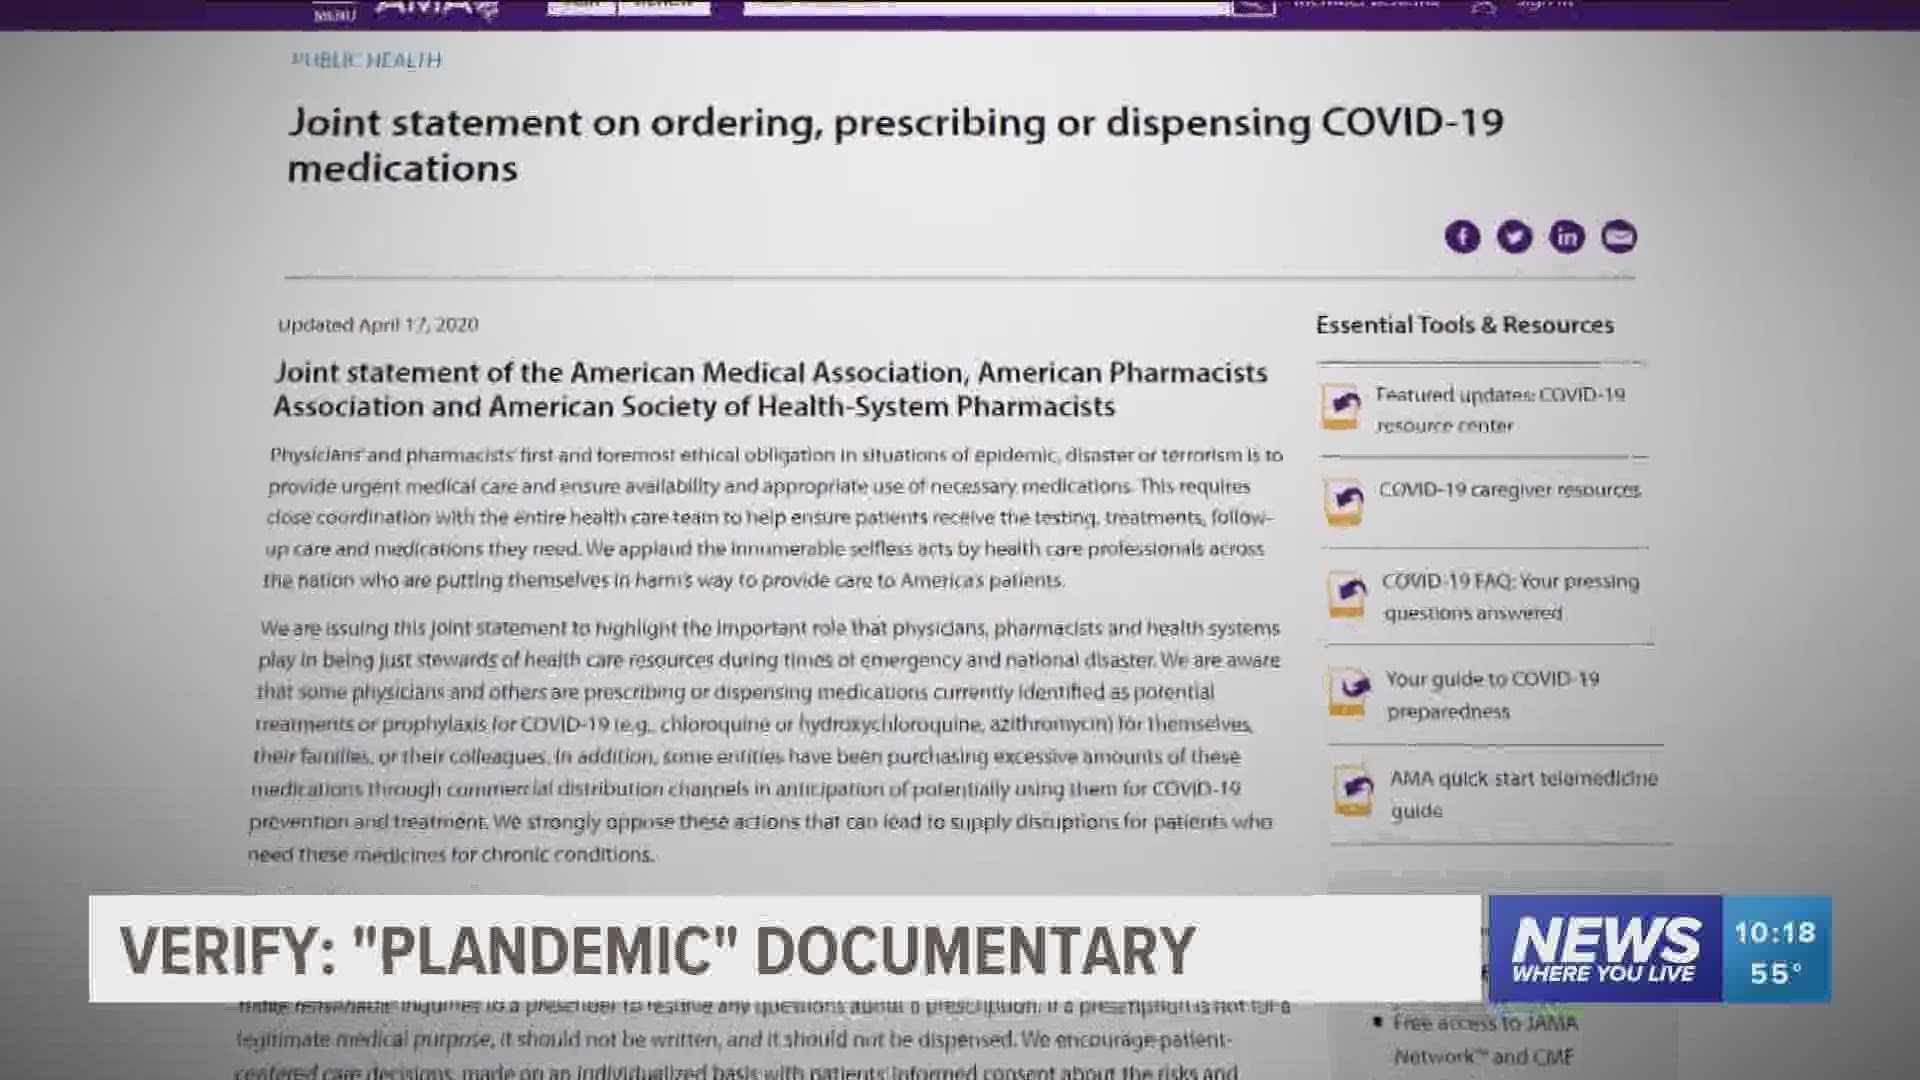 Our Verify team takes a look at the "Plandemic" documentary that surfaced on social media